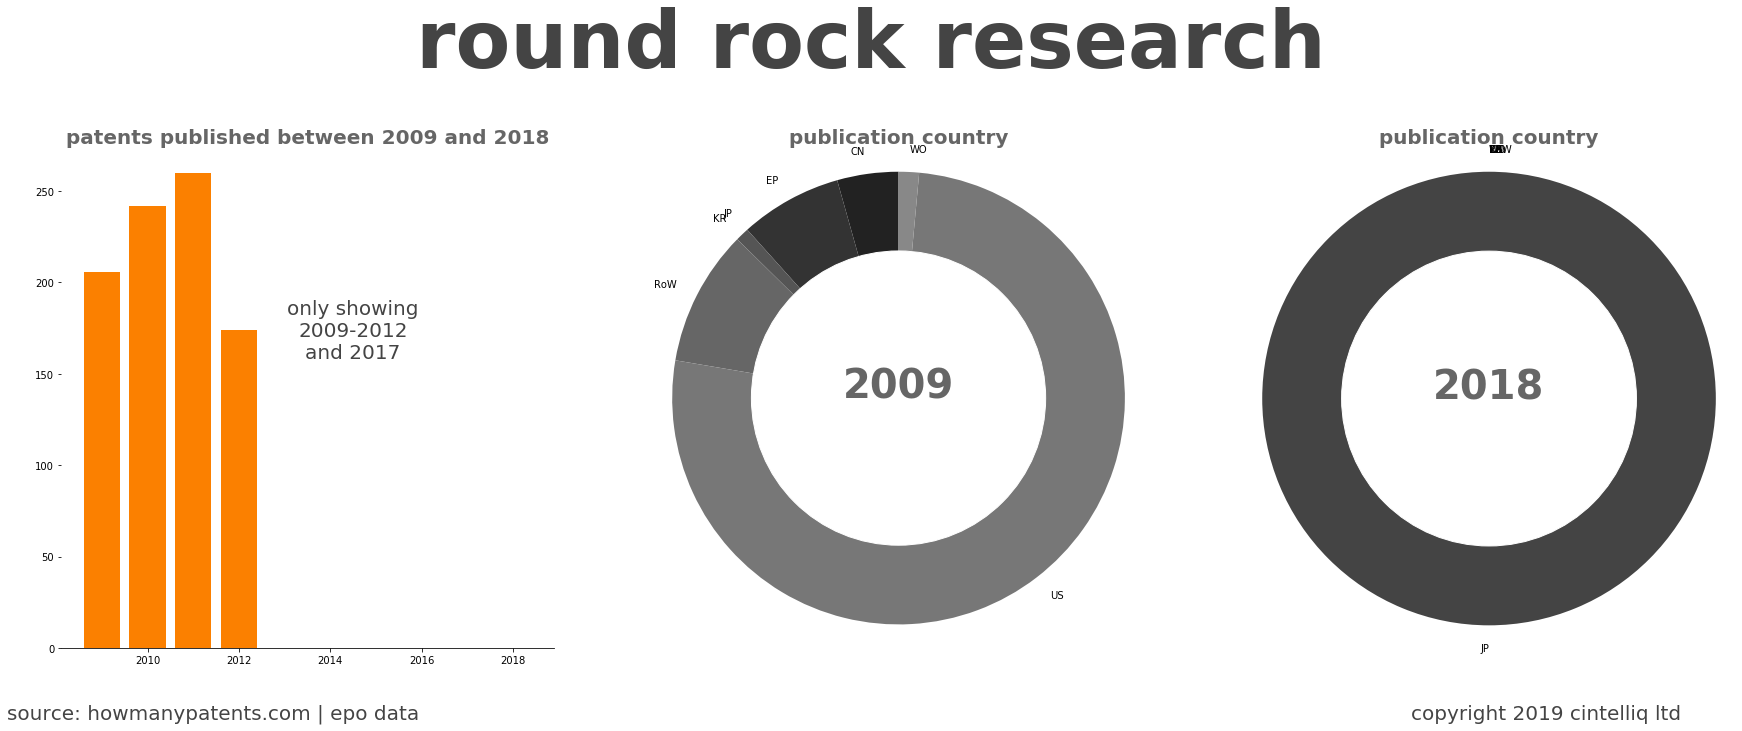 summary of patents for Round Rock Research